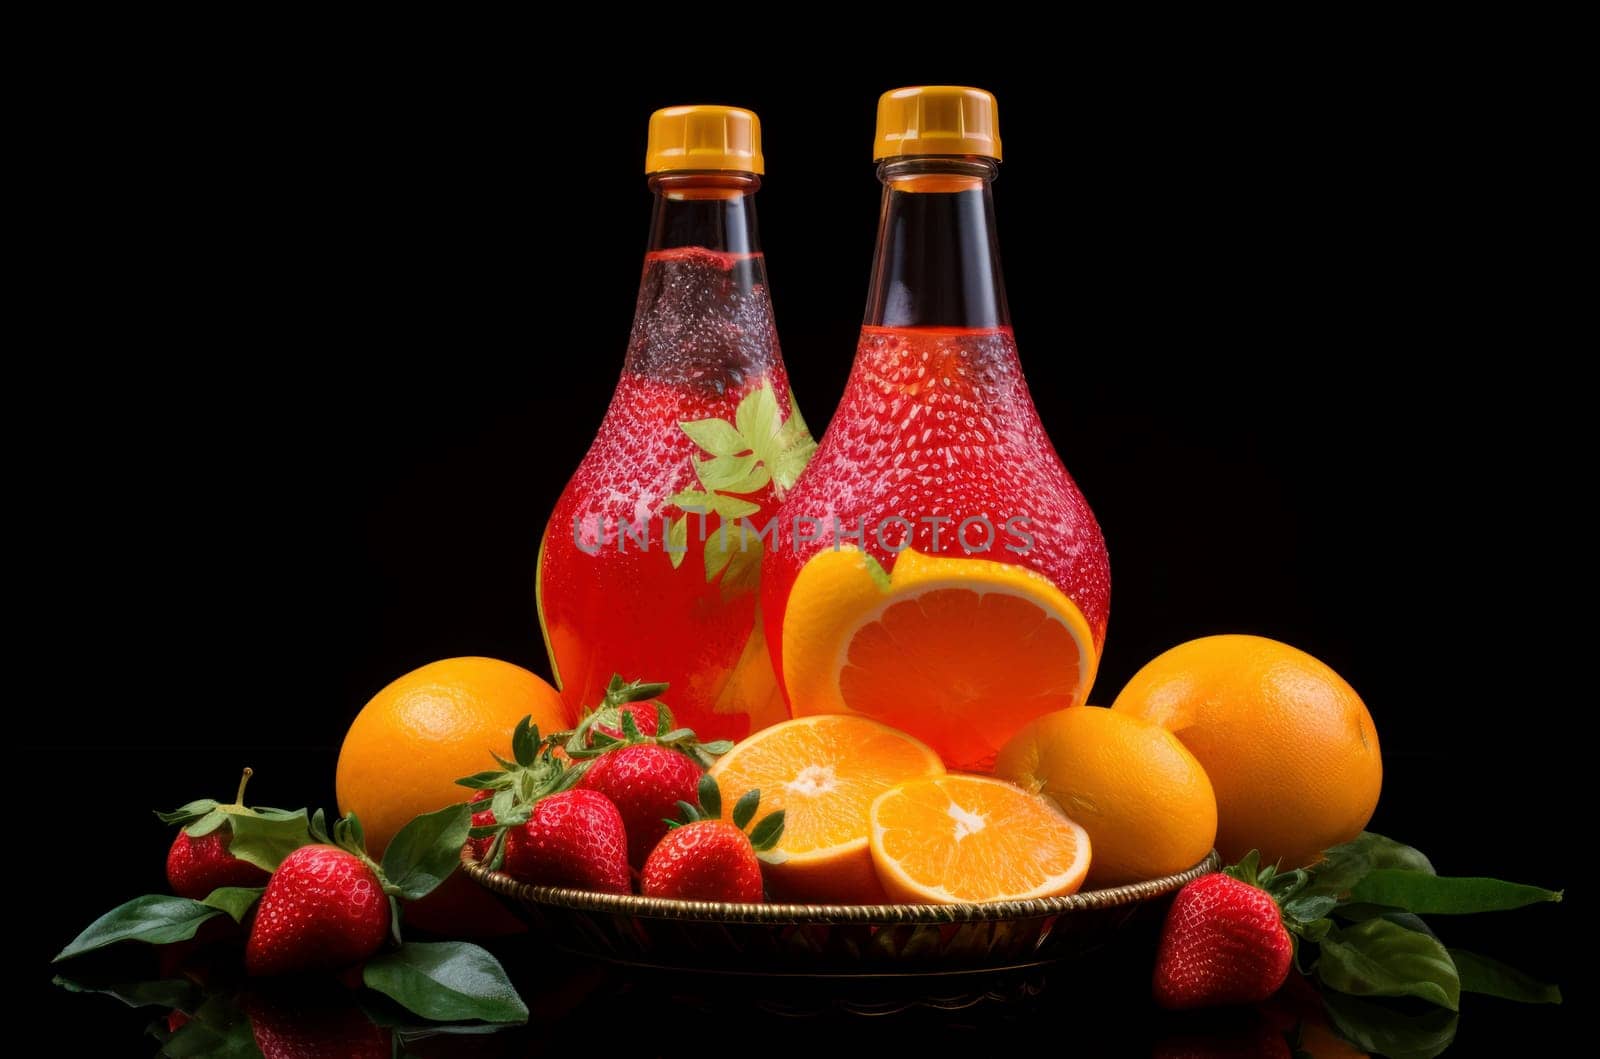 Two bottles of sparkling fruit drinks surrounded by fresh oranges, strawberries, and mint on a dark background